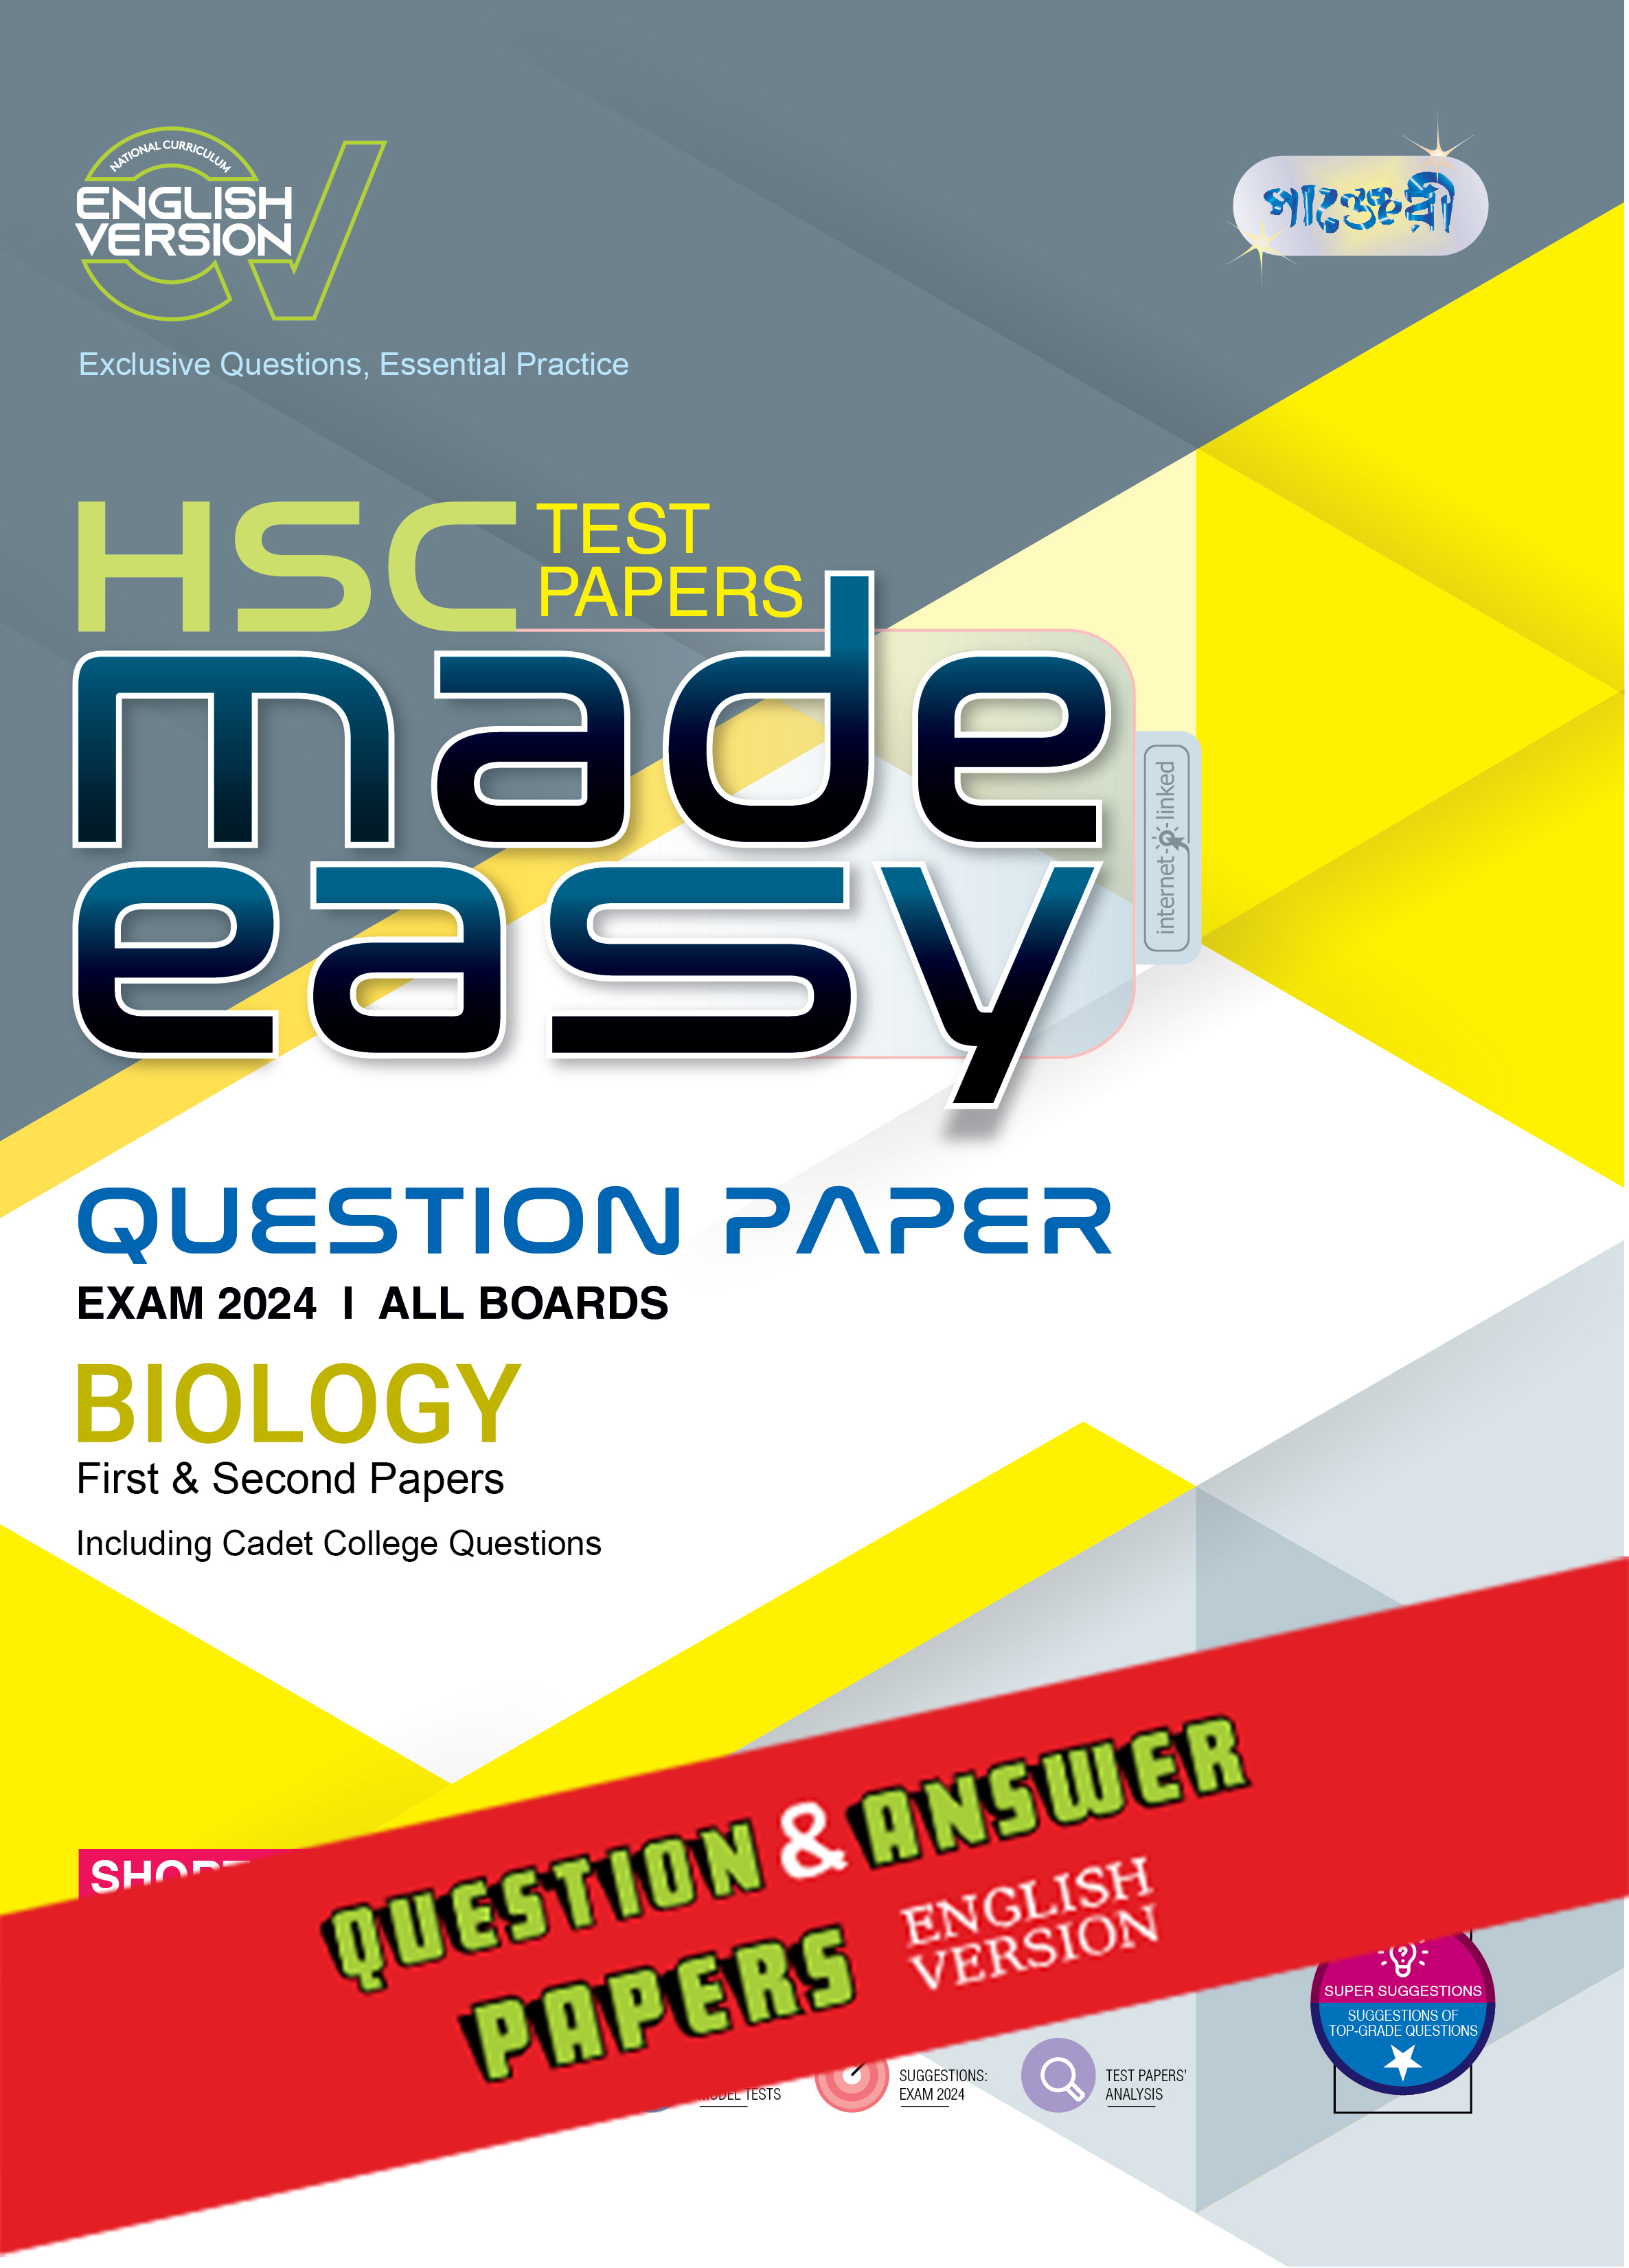 Panjeree Biology First & Second Papers - HSC 2024 Test Papers Made Easy (Question + Answer Paper) - English Version (পেপারব্যাক)